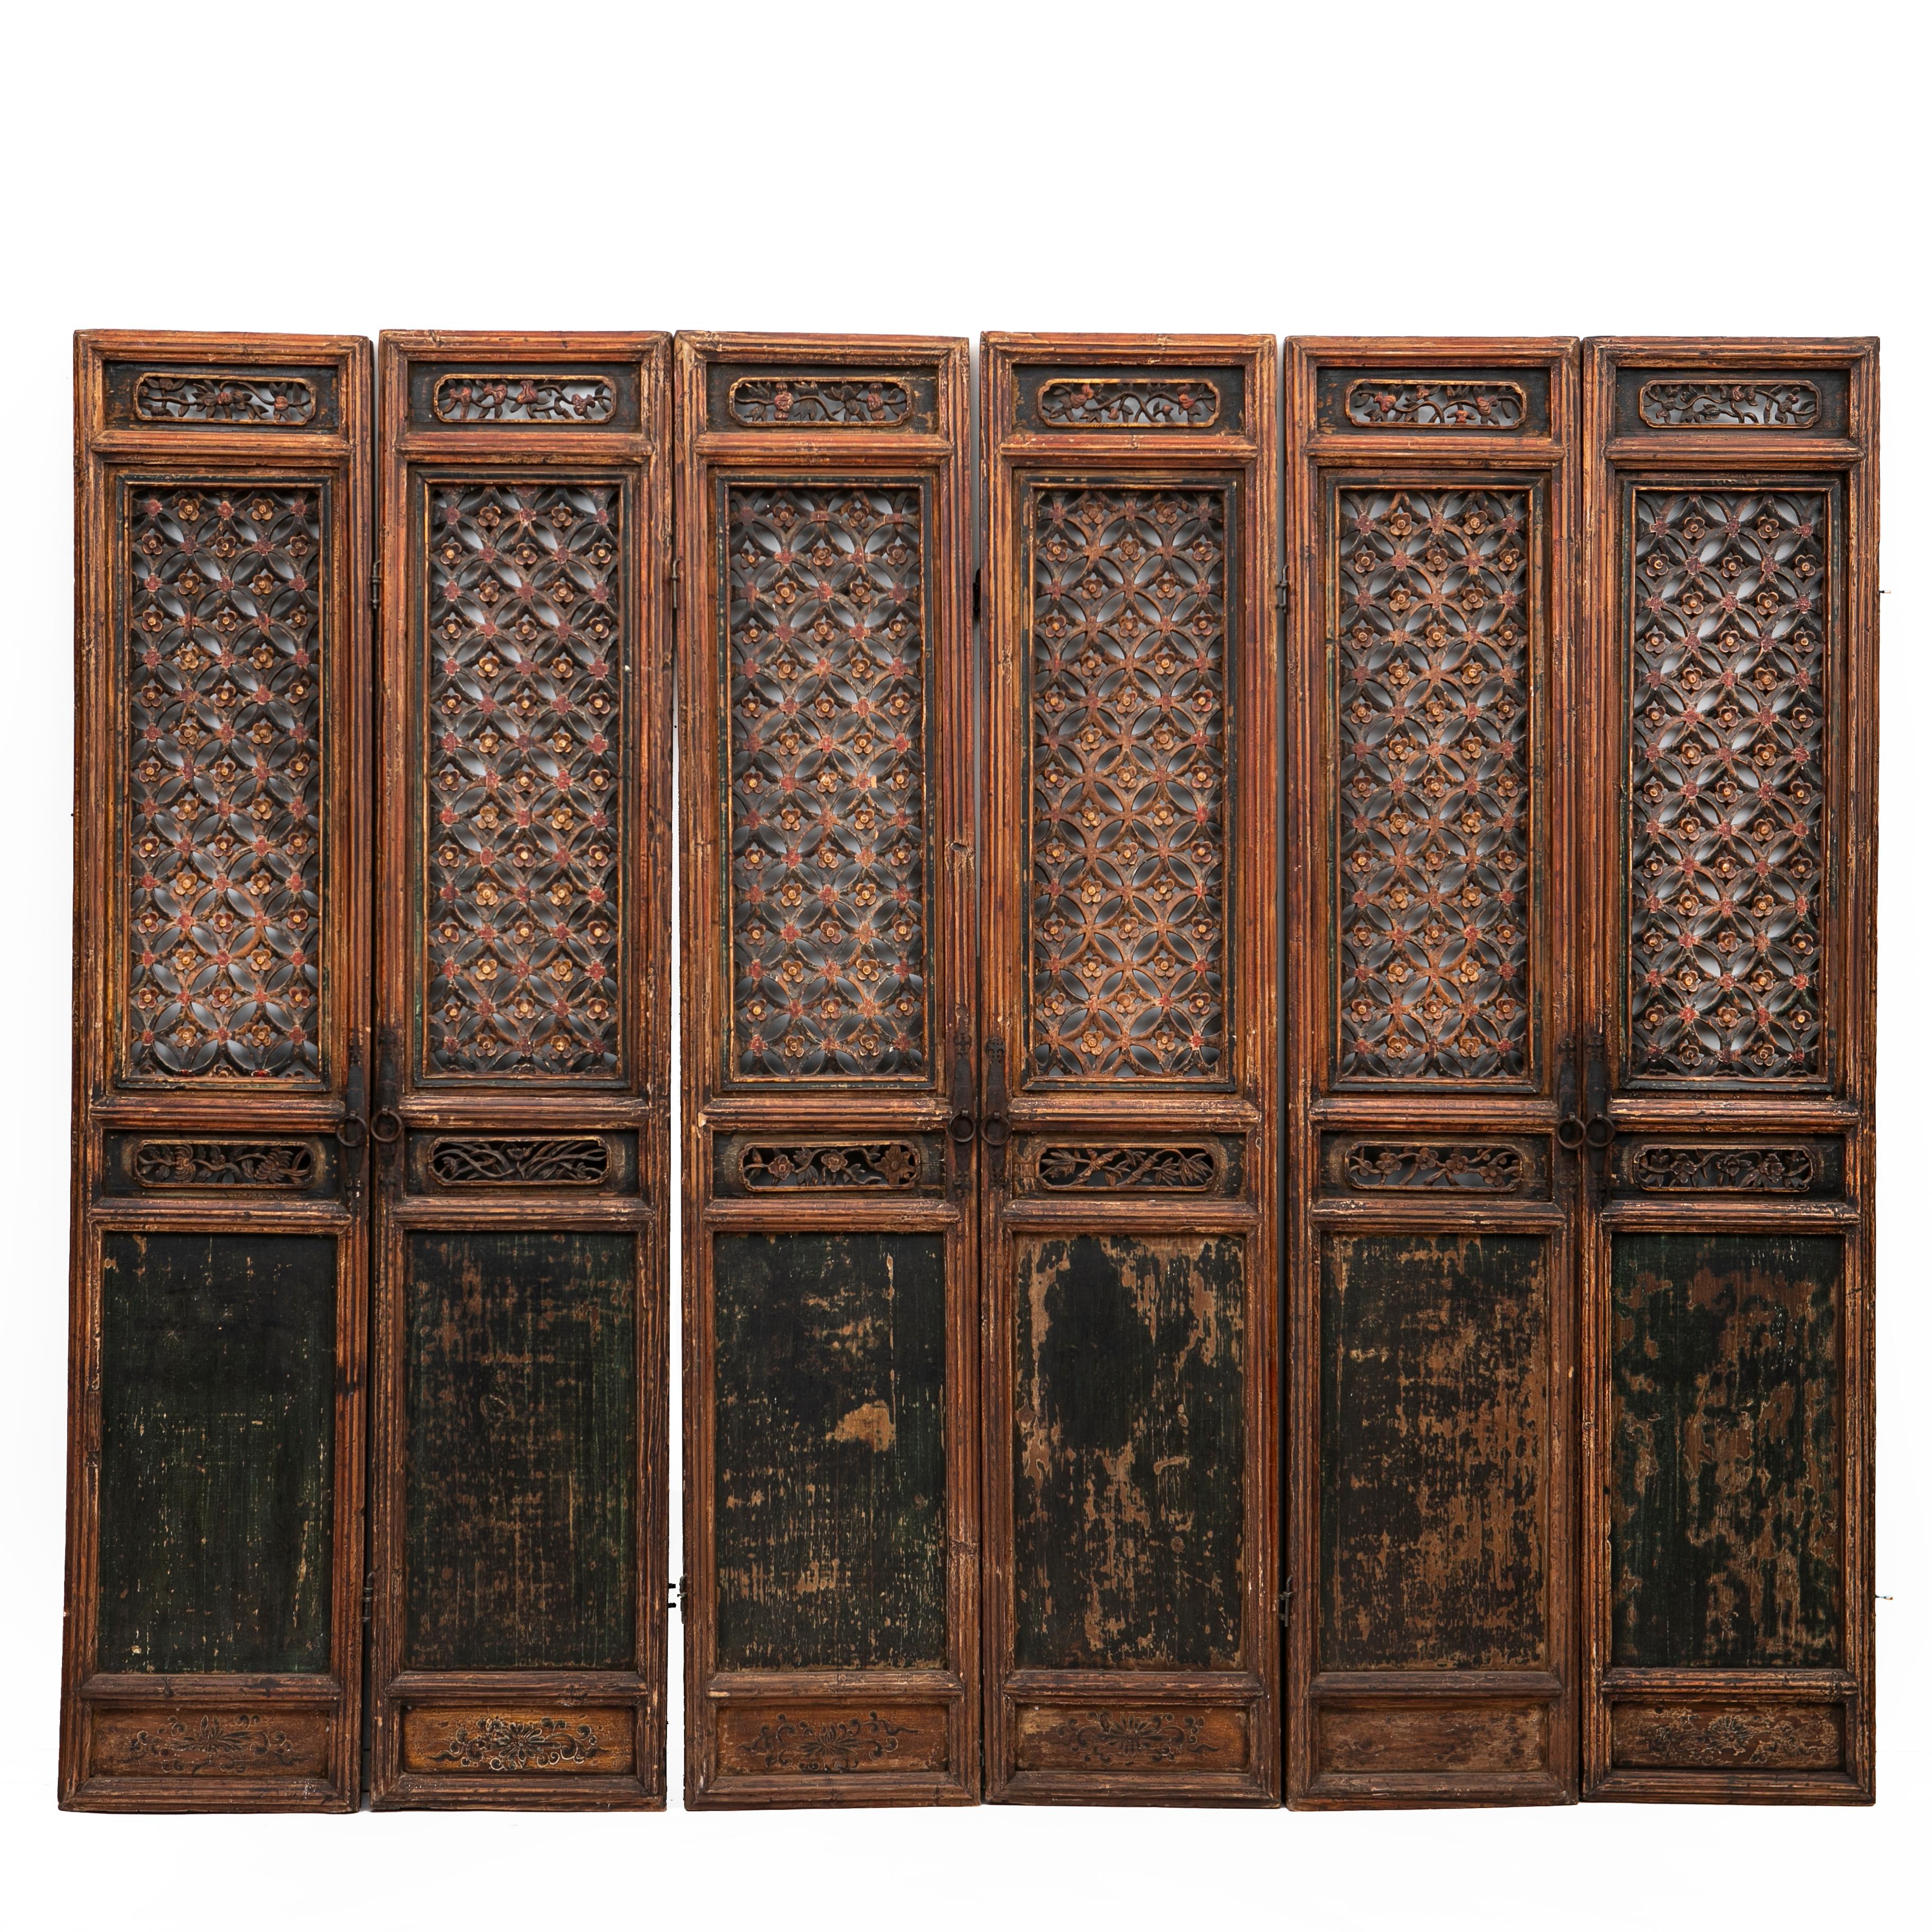 Set of 6 Antique Chinese Lattice Panels For Sale 5